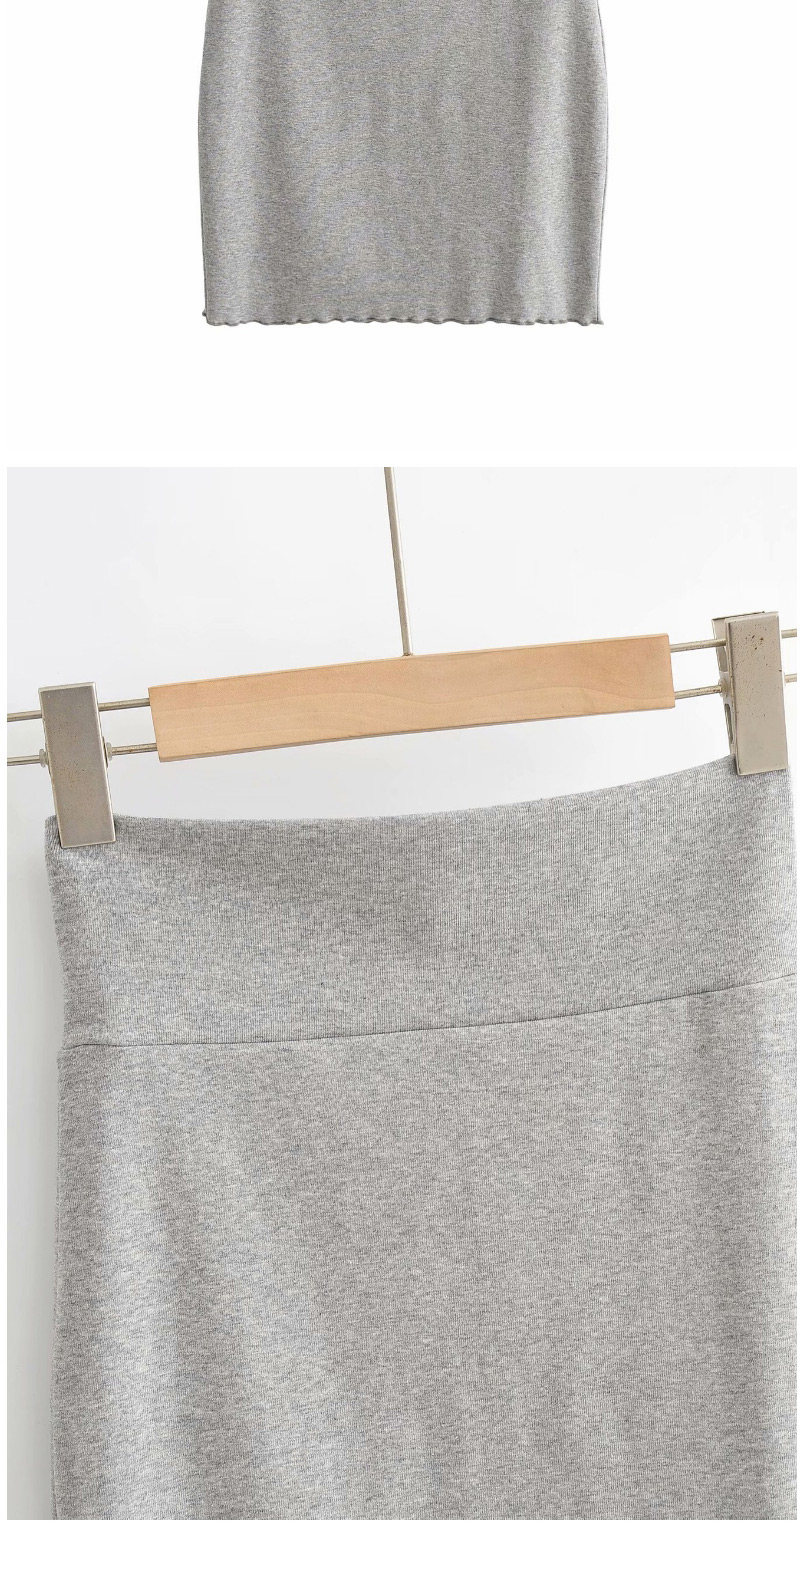 Fashion Gray Solid Color High Waist Slim Fit Hip Skirt With Wooden Ears,Skirts